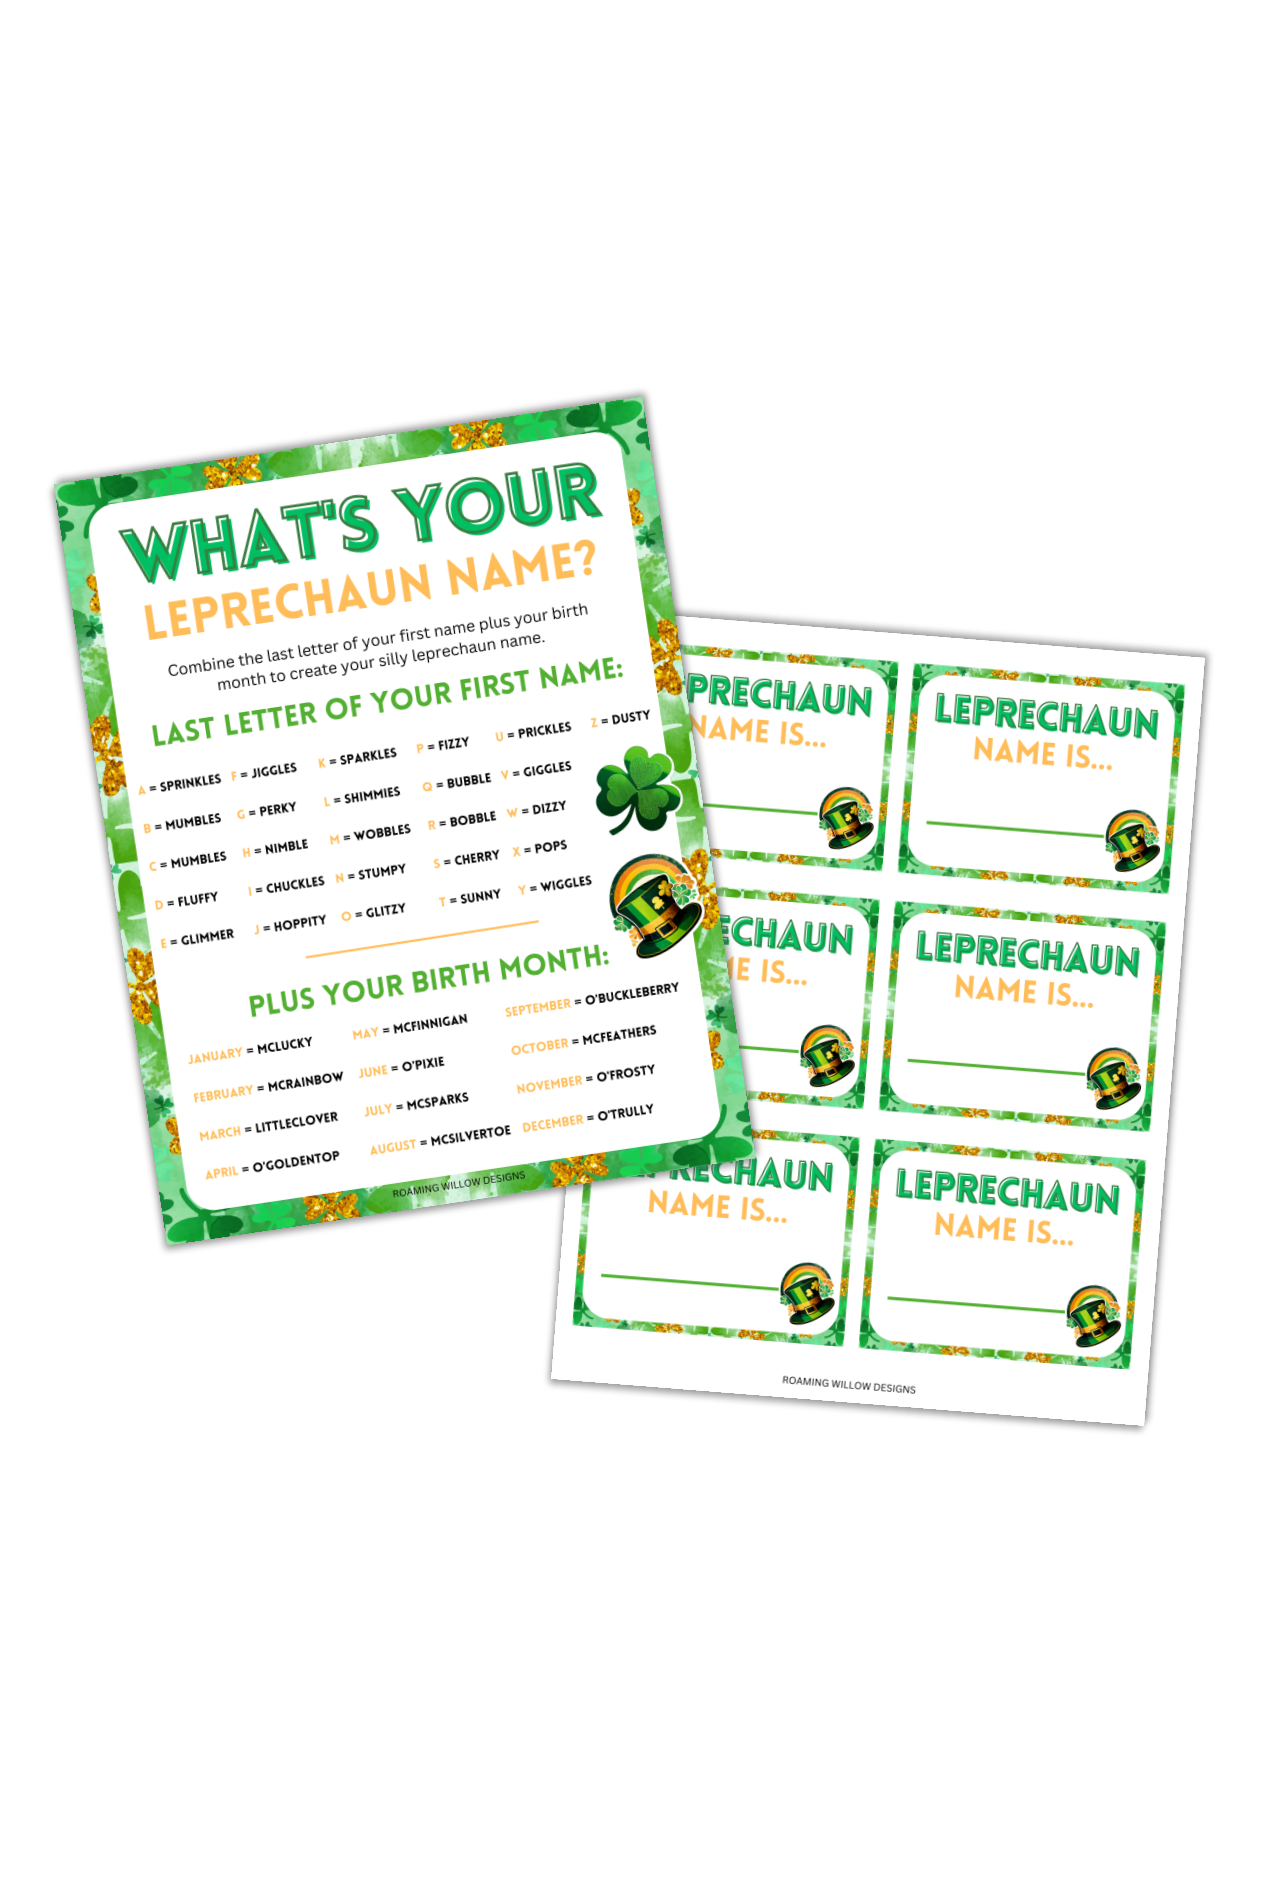 What is your leprechaun name printable â roaming willow designs